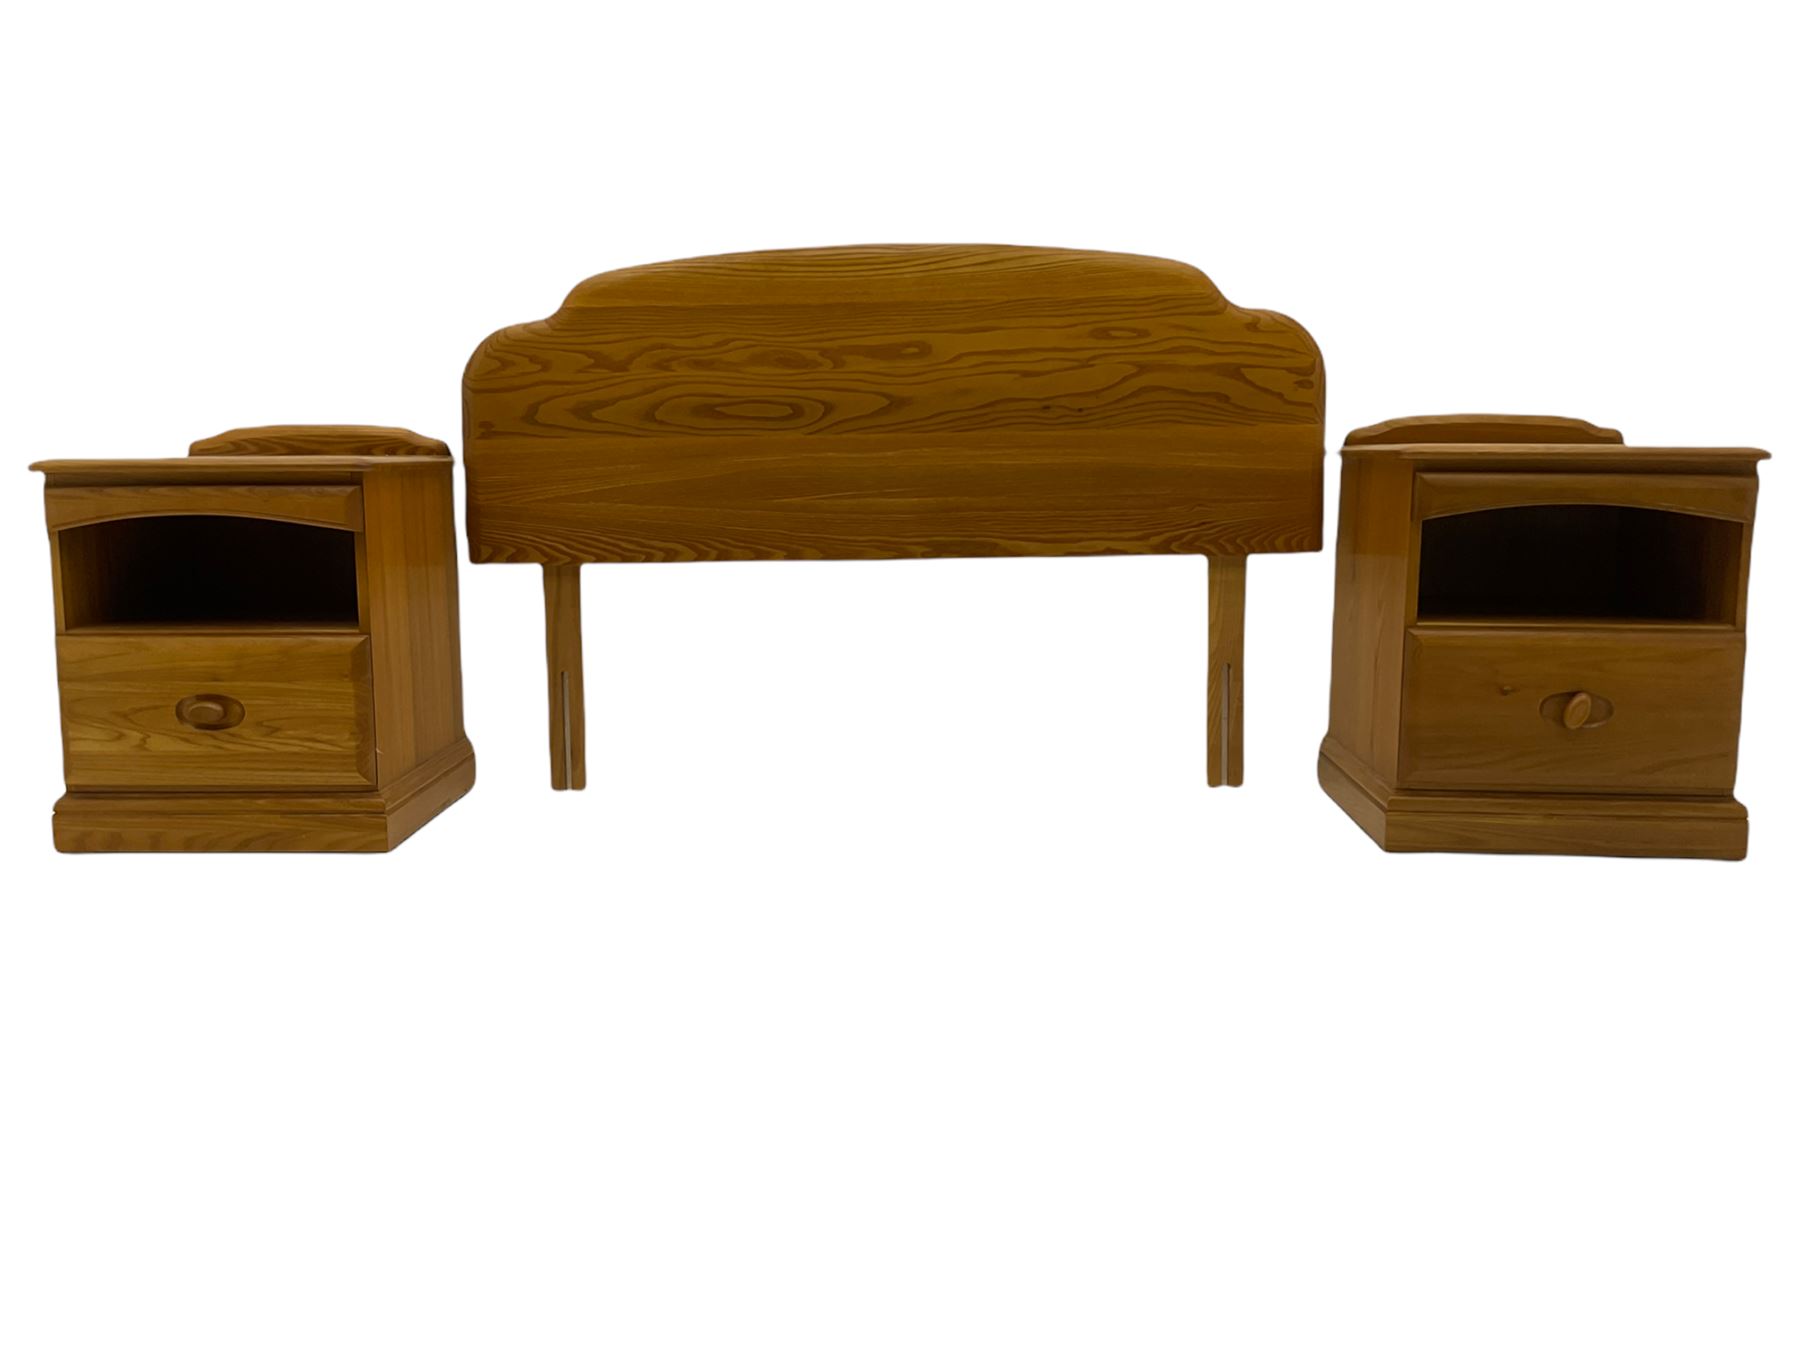 Heritage furniture - Ercol style pair of bedside chests